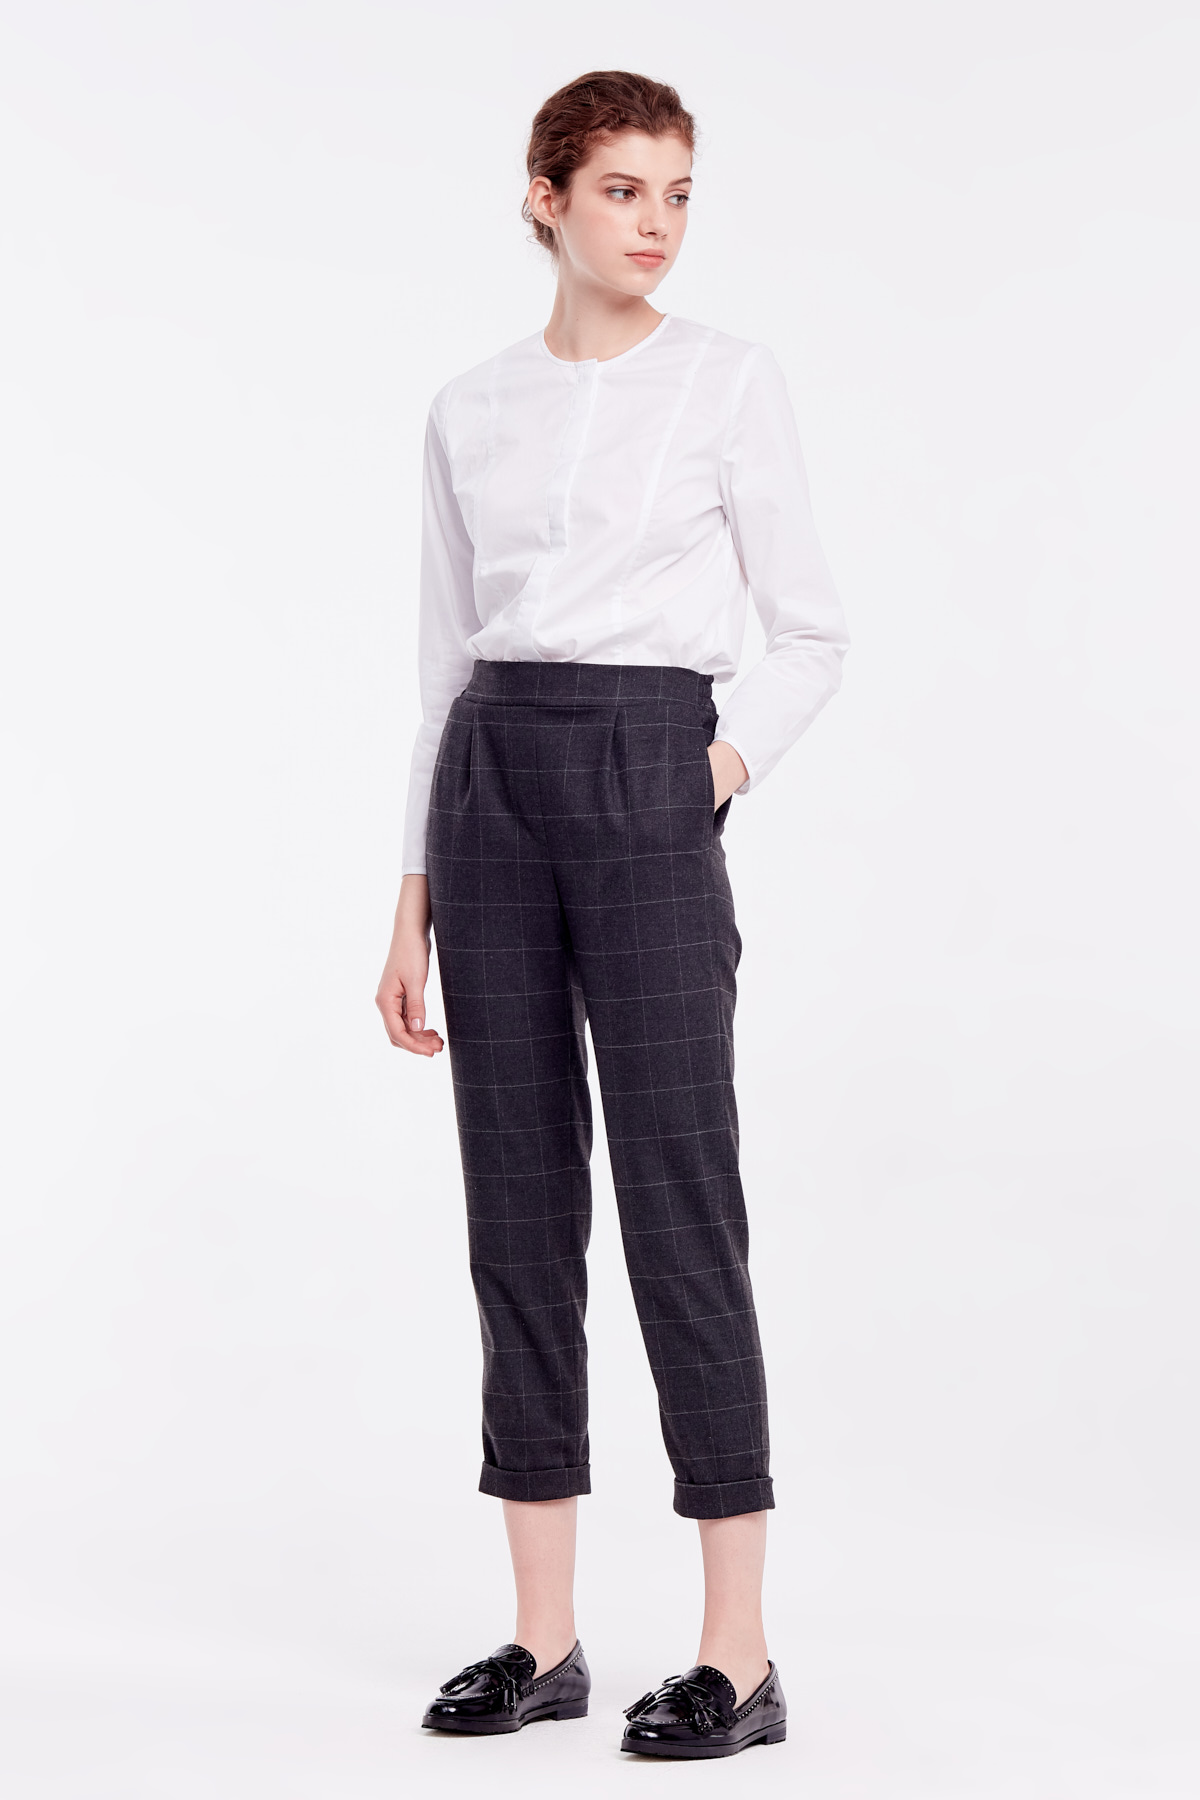 Loose grey checkered pants with cuffs, photo 5